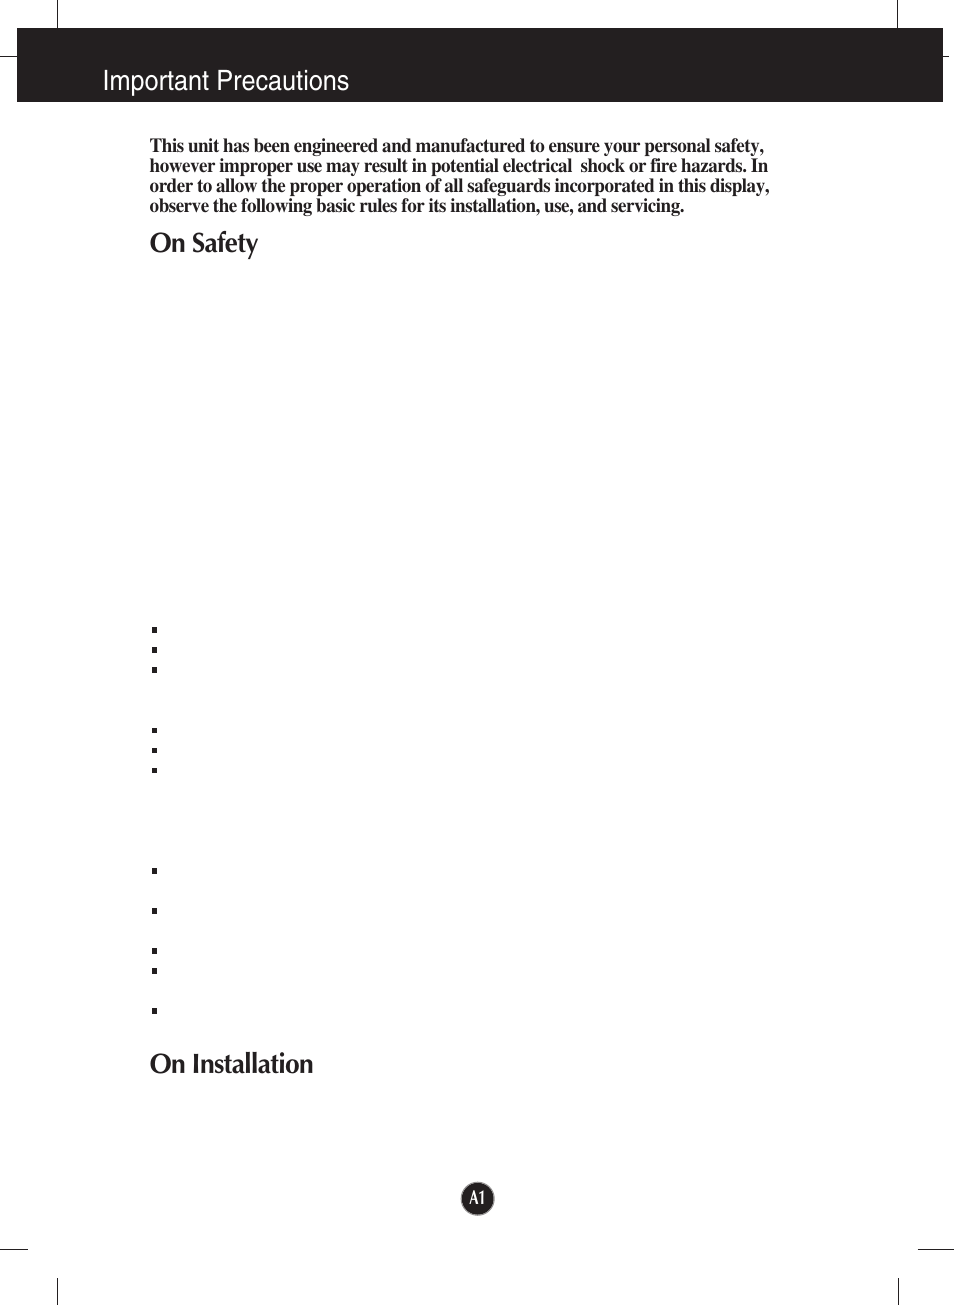 Important precautions, On safety, On installation | LG W2453V-PF User Manual | Page 2 / 26